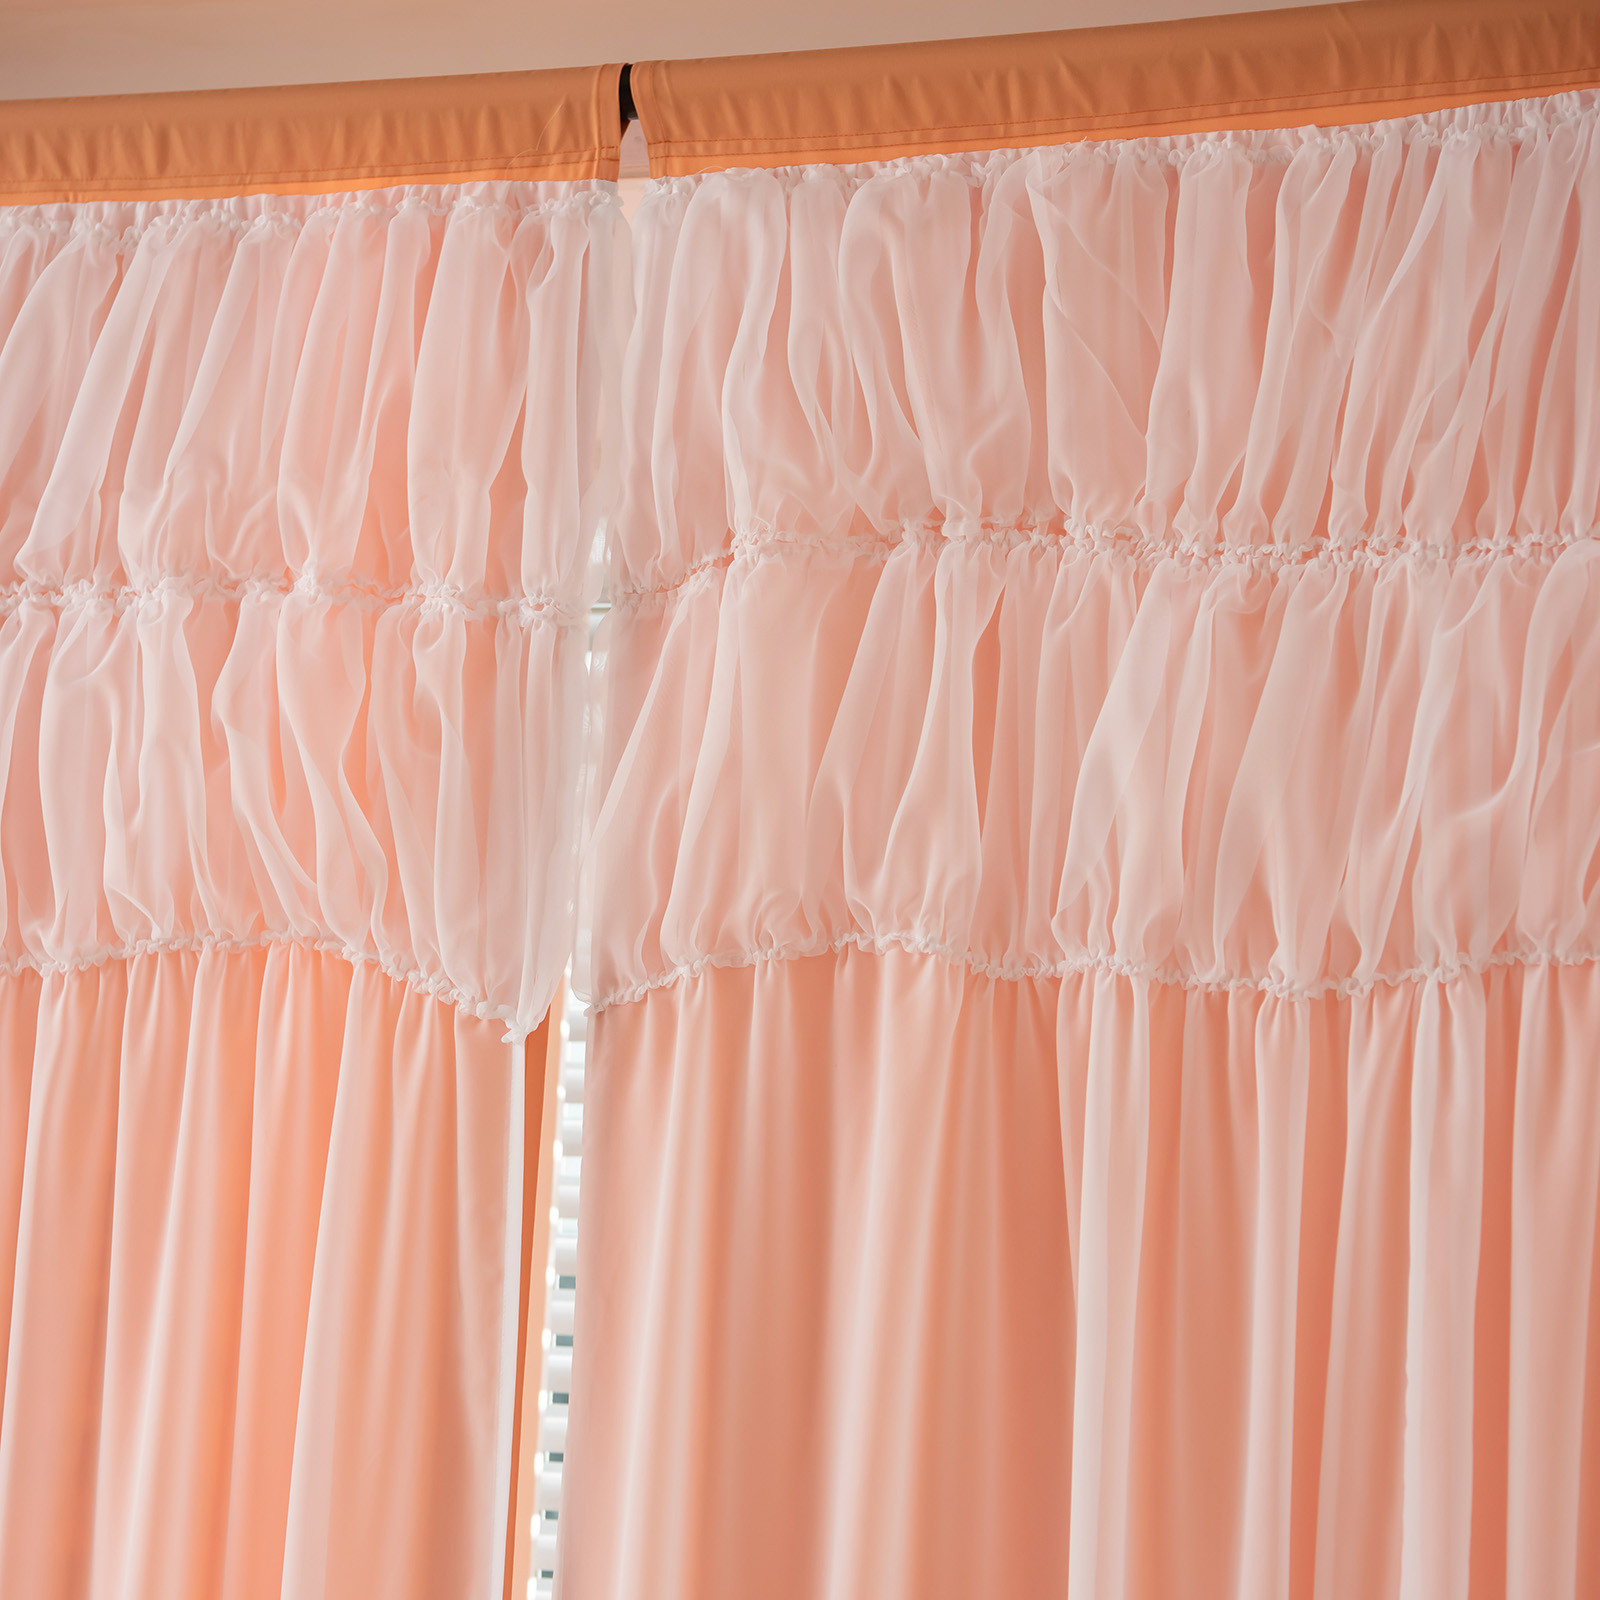 Curtain Short Length Cold Curtains 2 Panels Home Curtains Layered Solid Plain Panels And Sheer Sheer Curtains Window Curtain Panels 39"" Wide Curtains for Windows 66 to 120 Curtains Rose - image 4 of 9